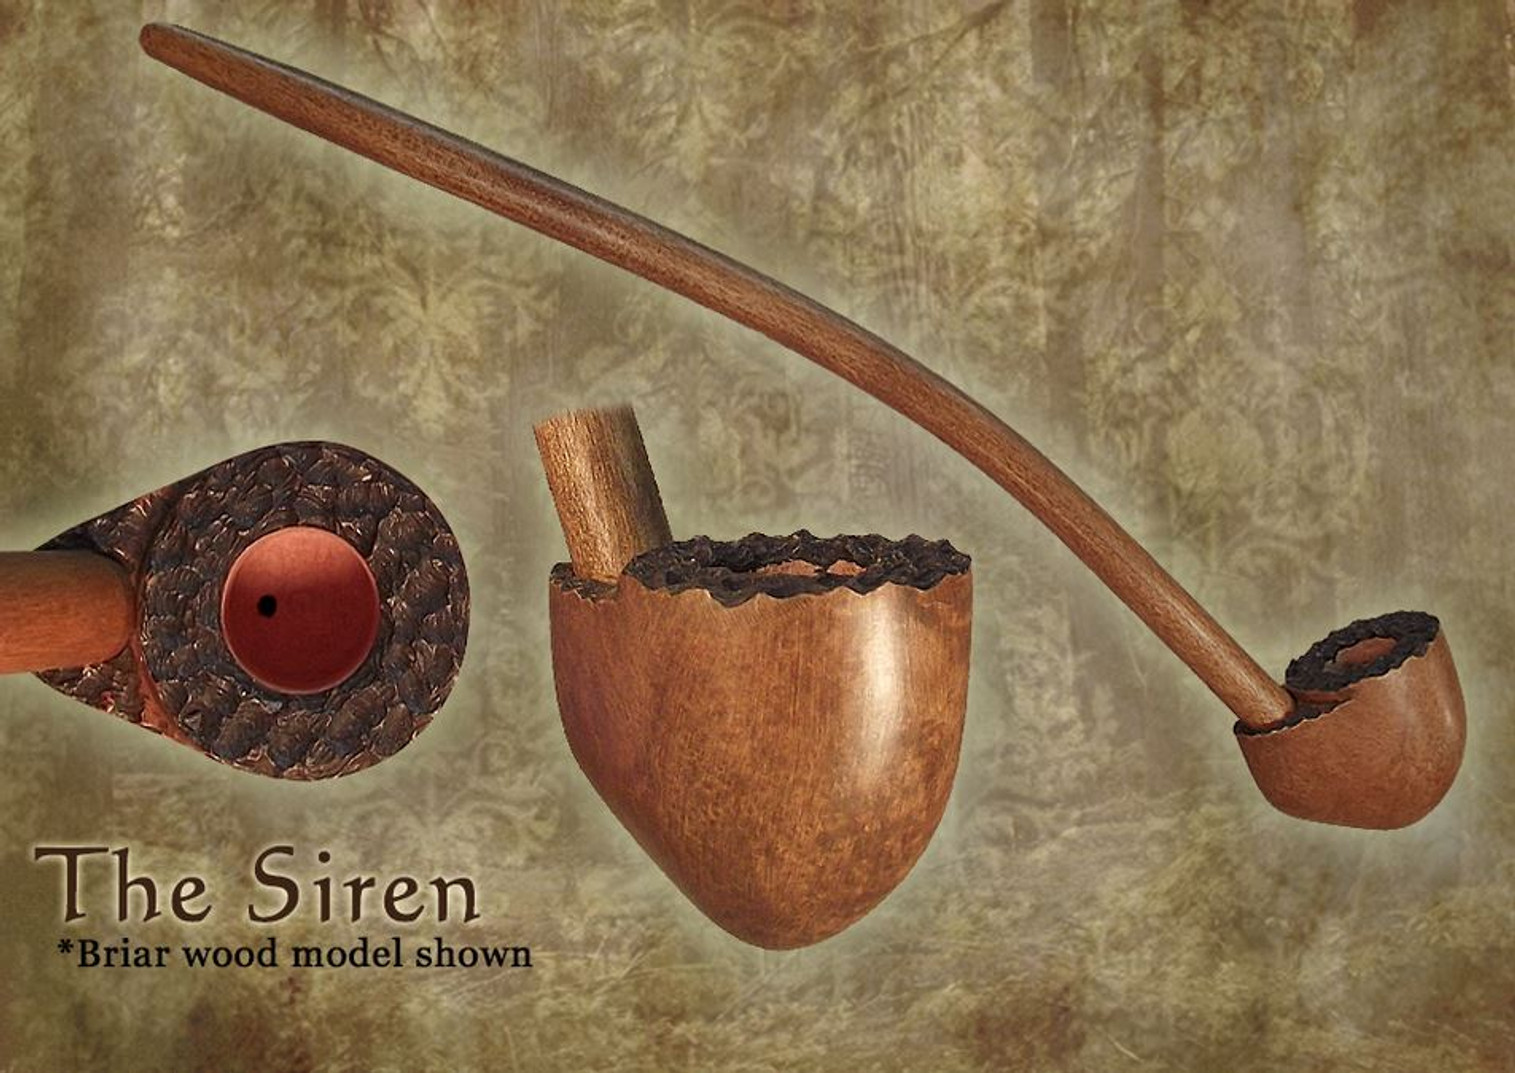 MacQueen Pipes 'The Siren' - Briar Wood